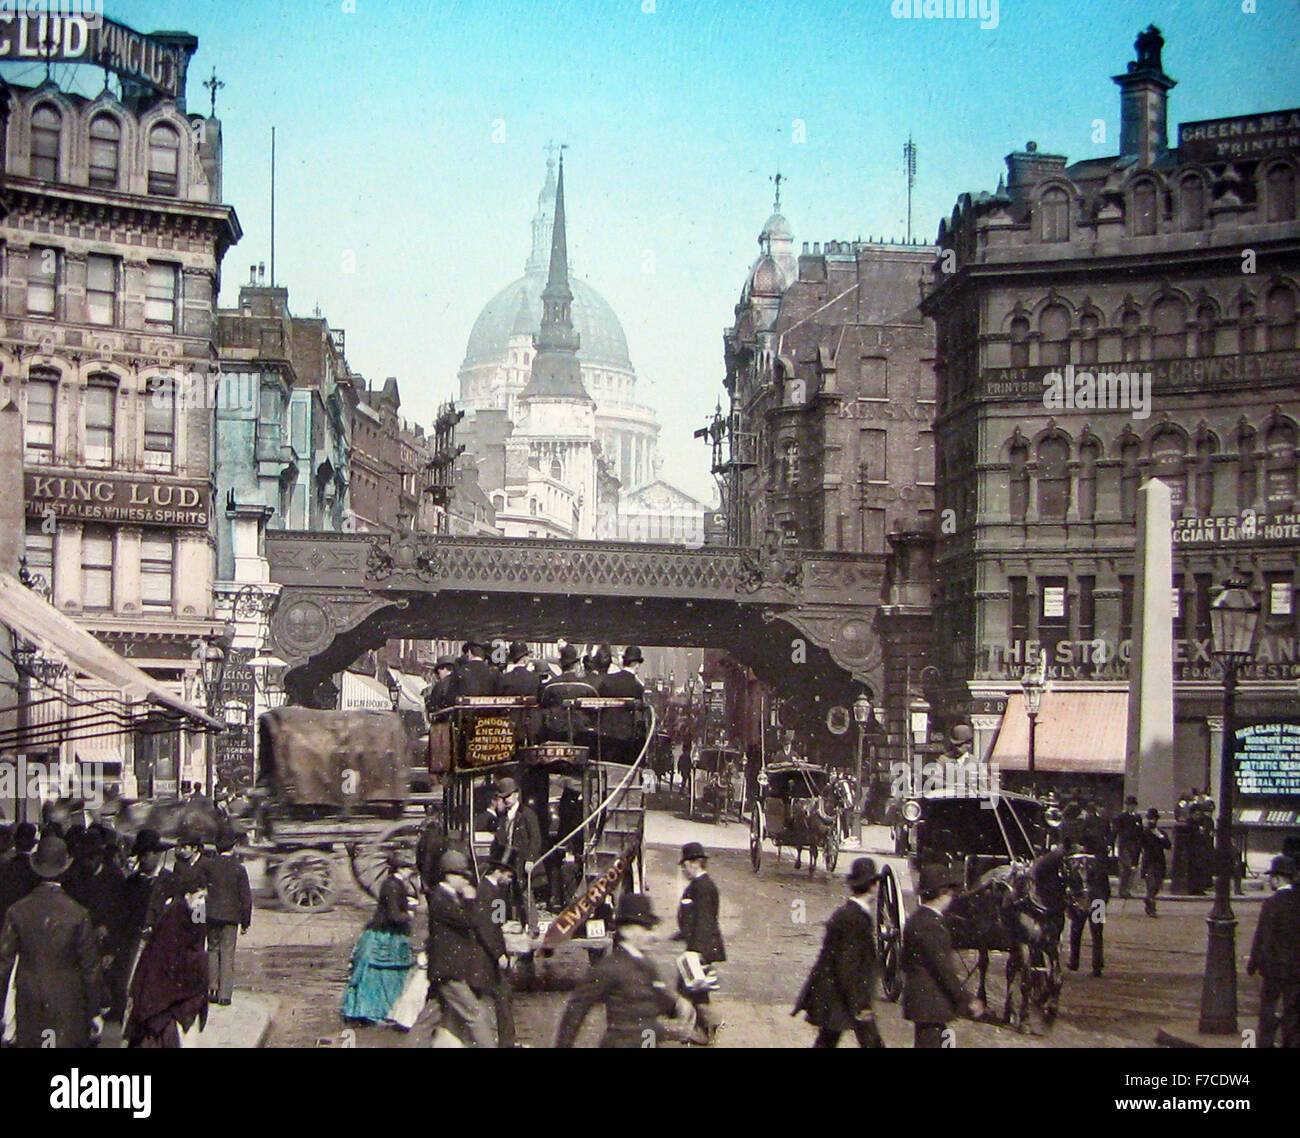 Ludgate Circus, London - Victorian period - hand coloured photo Stock Photo